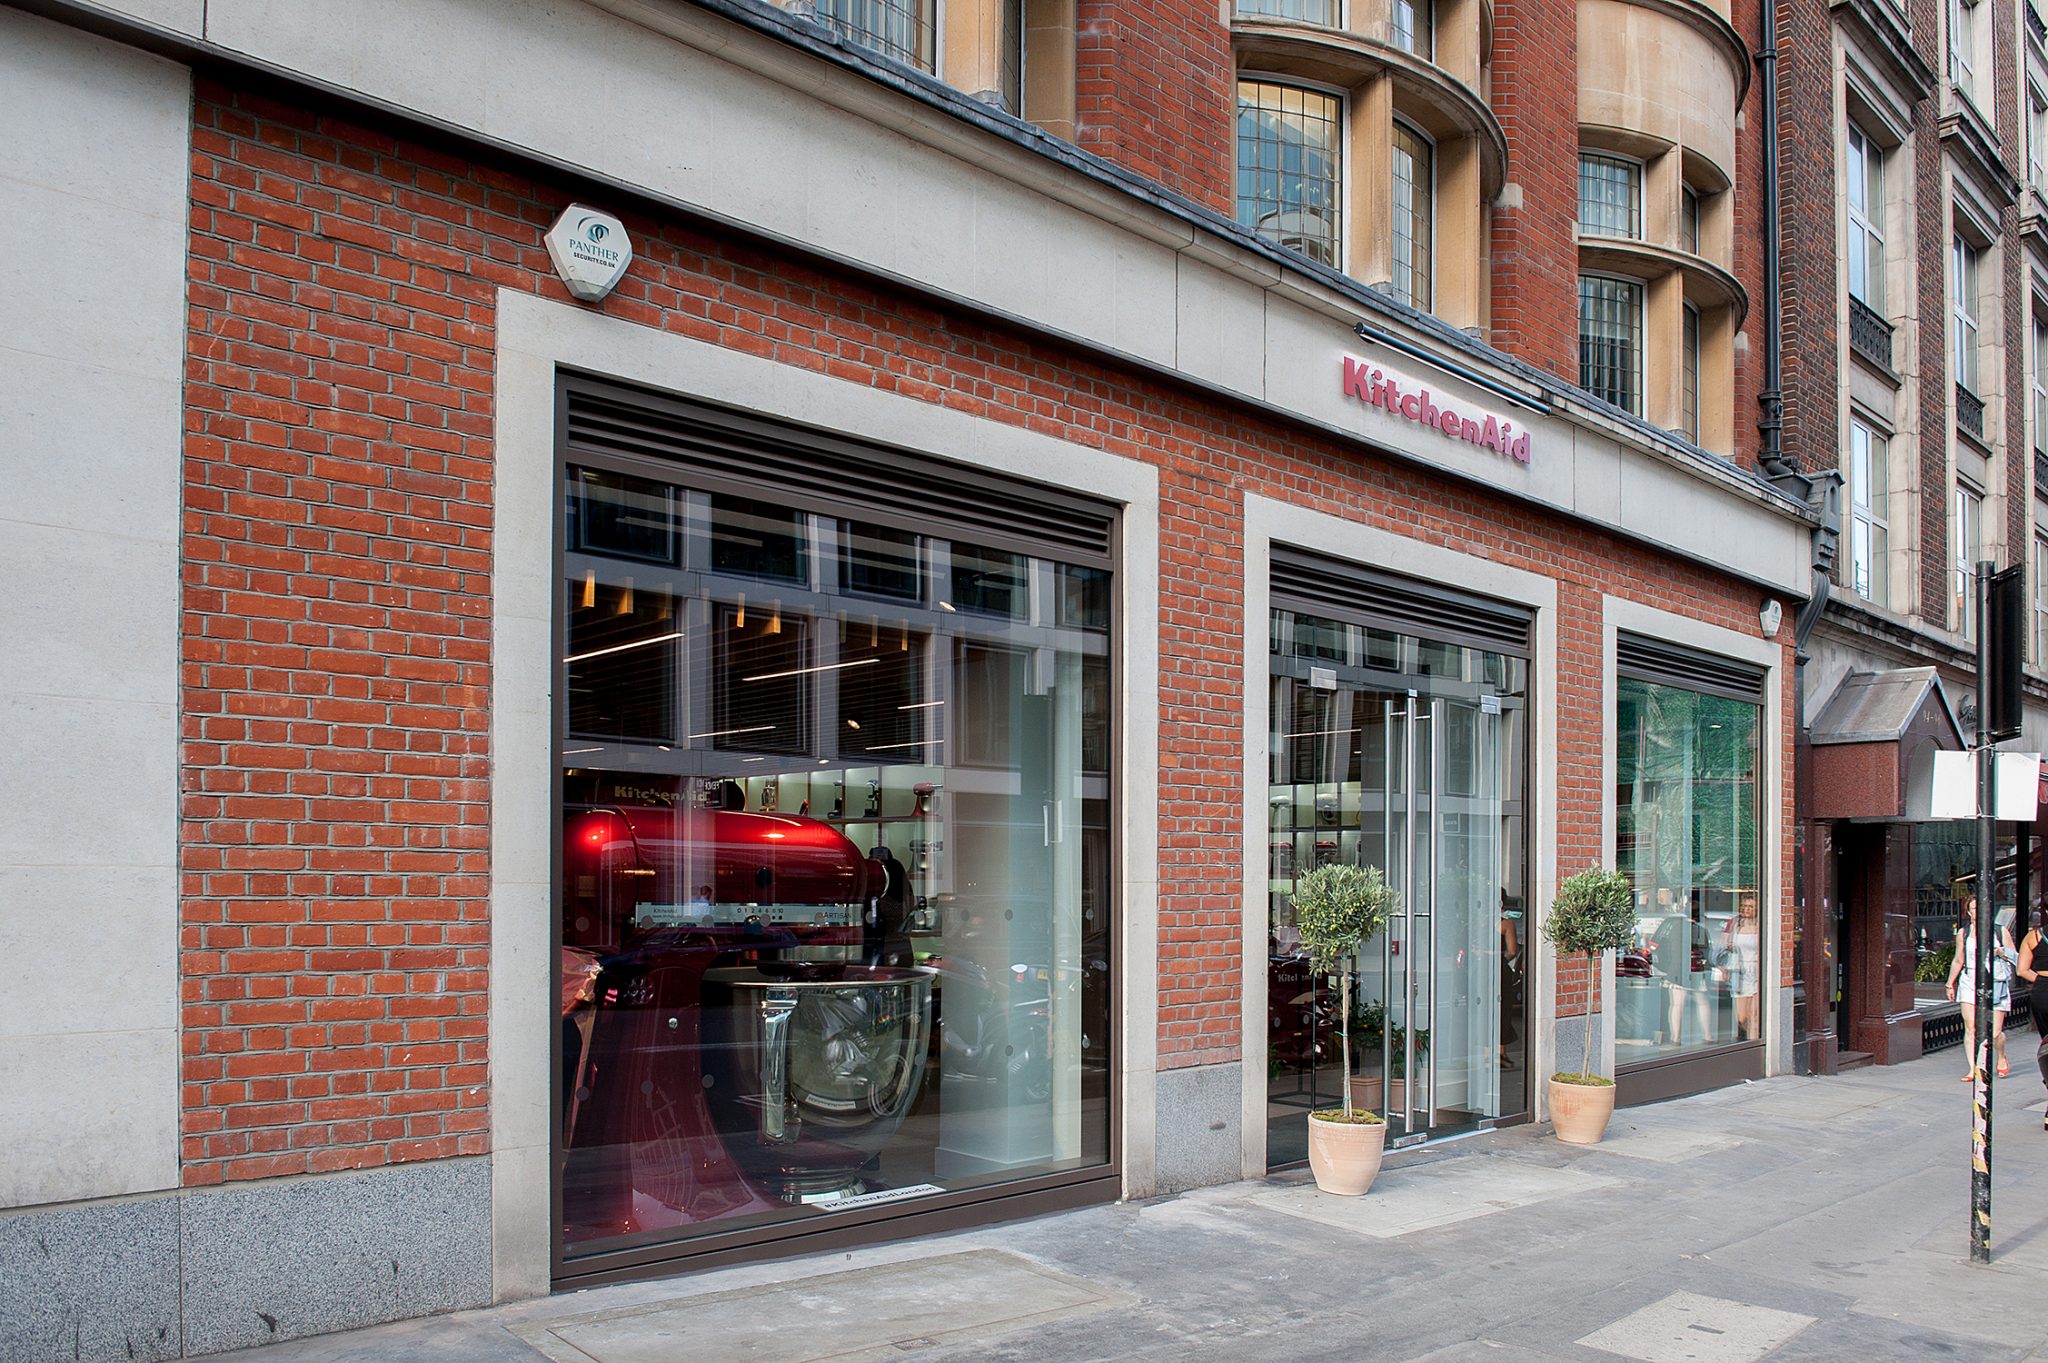 KITCHENAID SUPPORTS RETAILERS WITH BESPOKE TRAINING OPPORTUNITIES